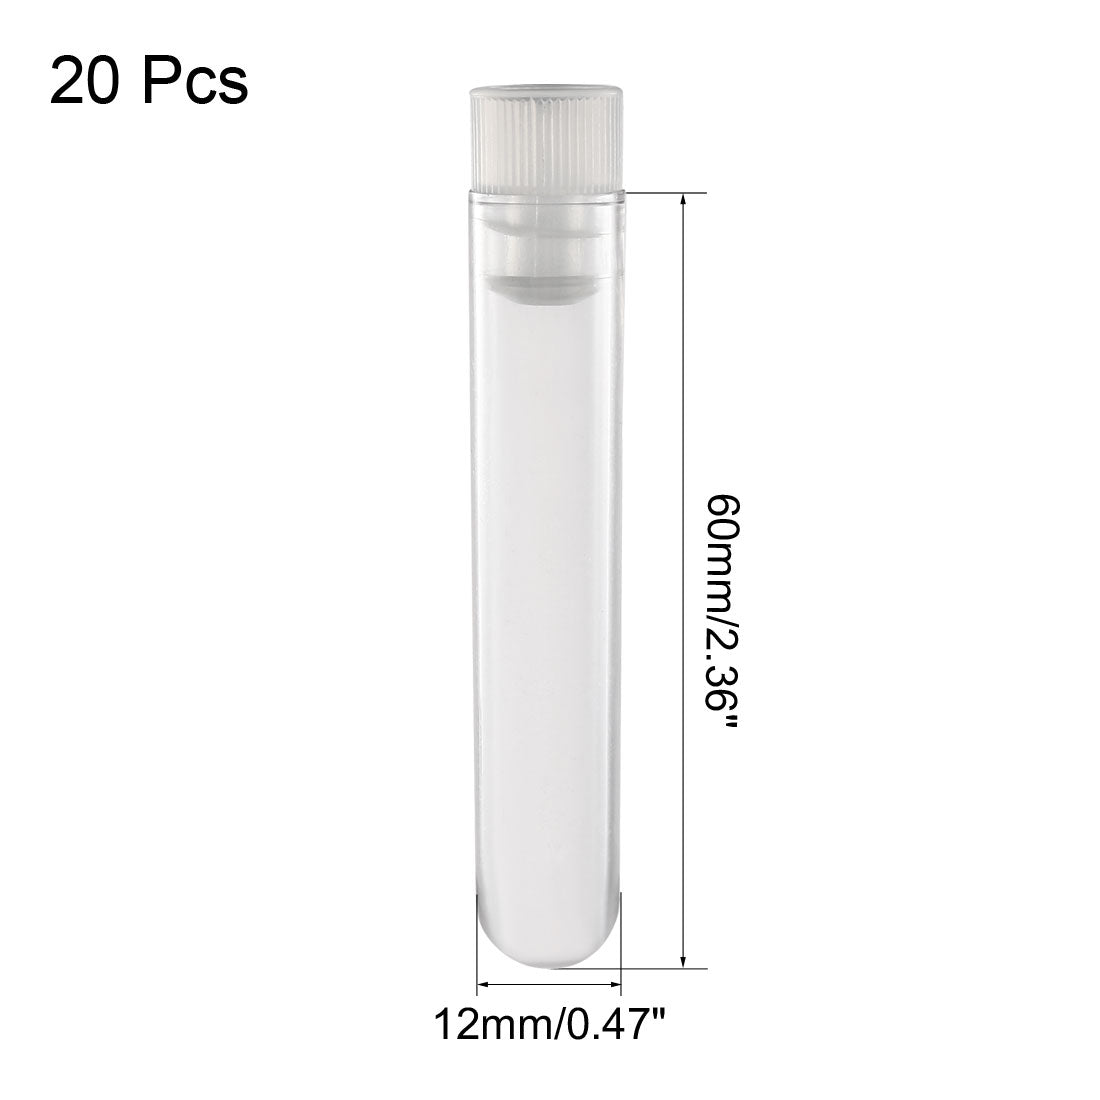 Uxcell Uxcell 20 Pcs Centrifuge Test Tubes Round Bottom Polystyrene with White Cap 12 x 100mm